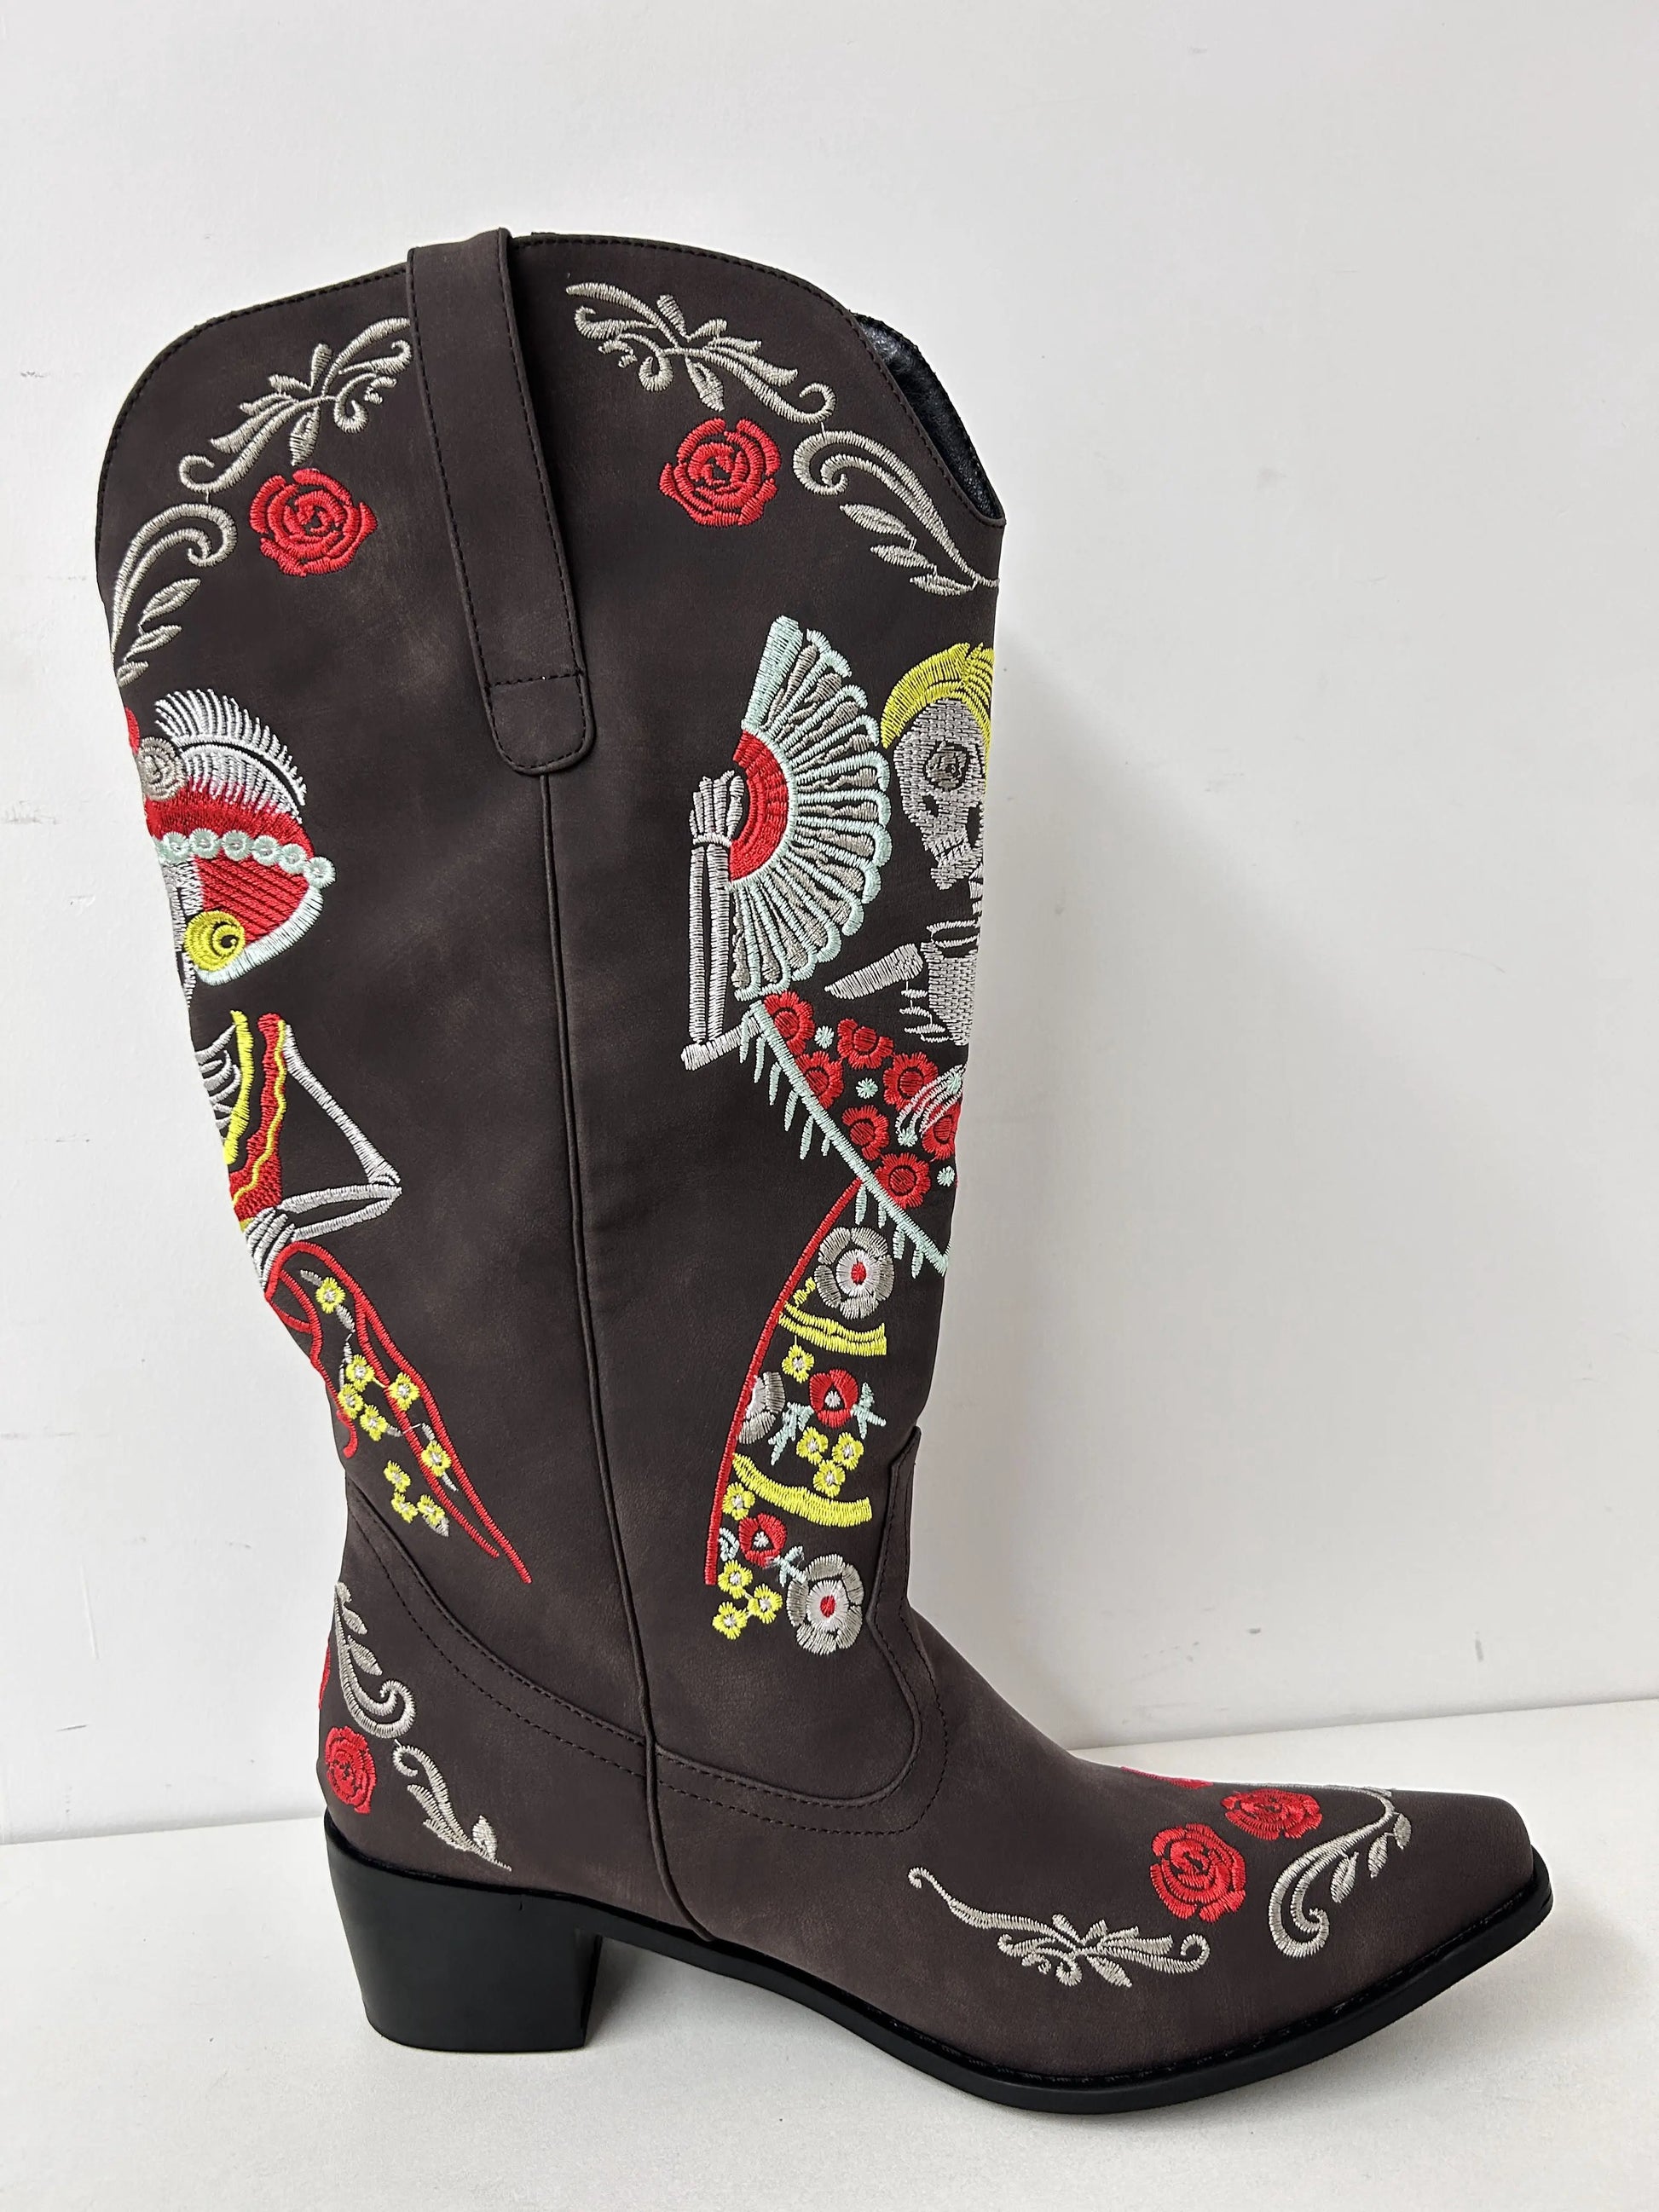 Day of the dead boots